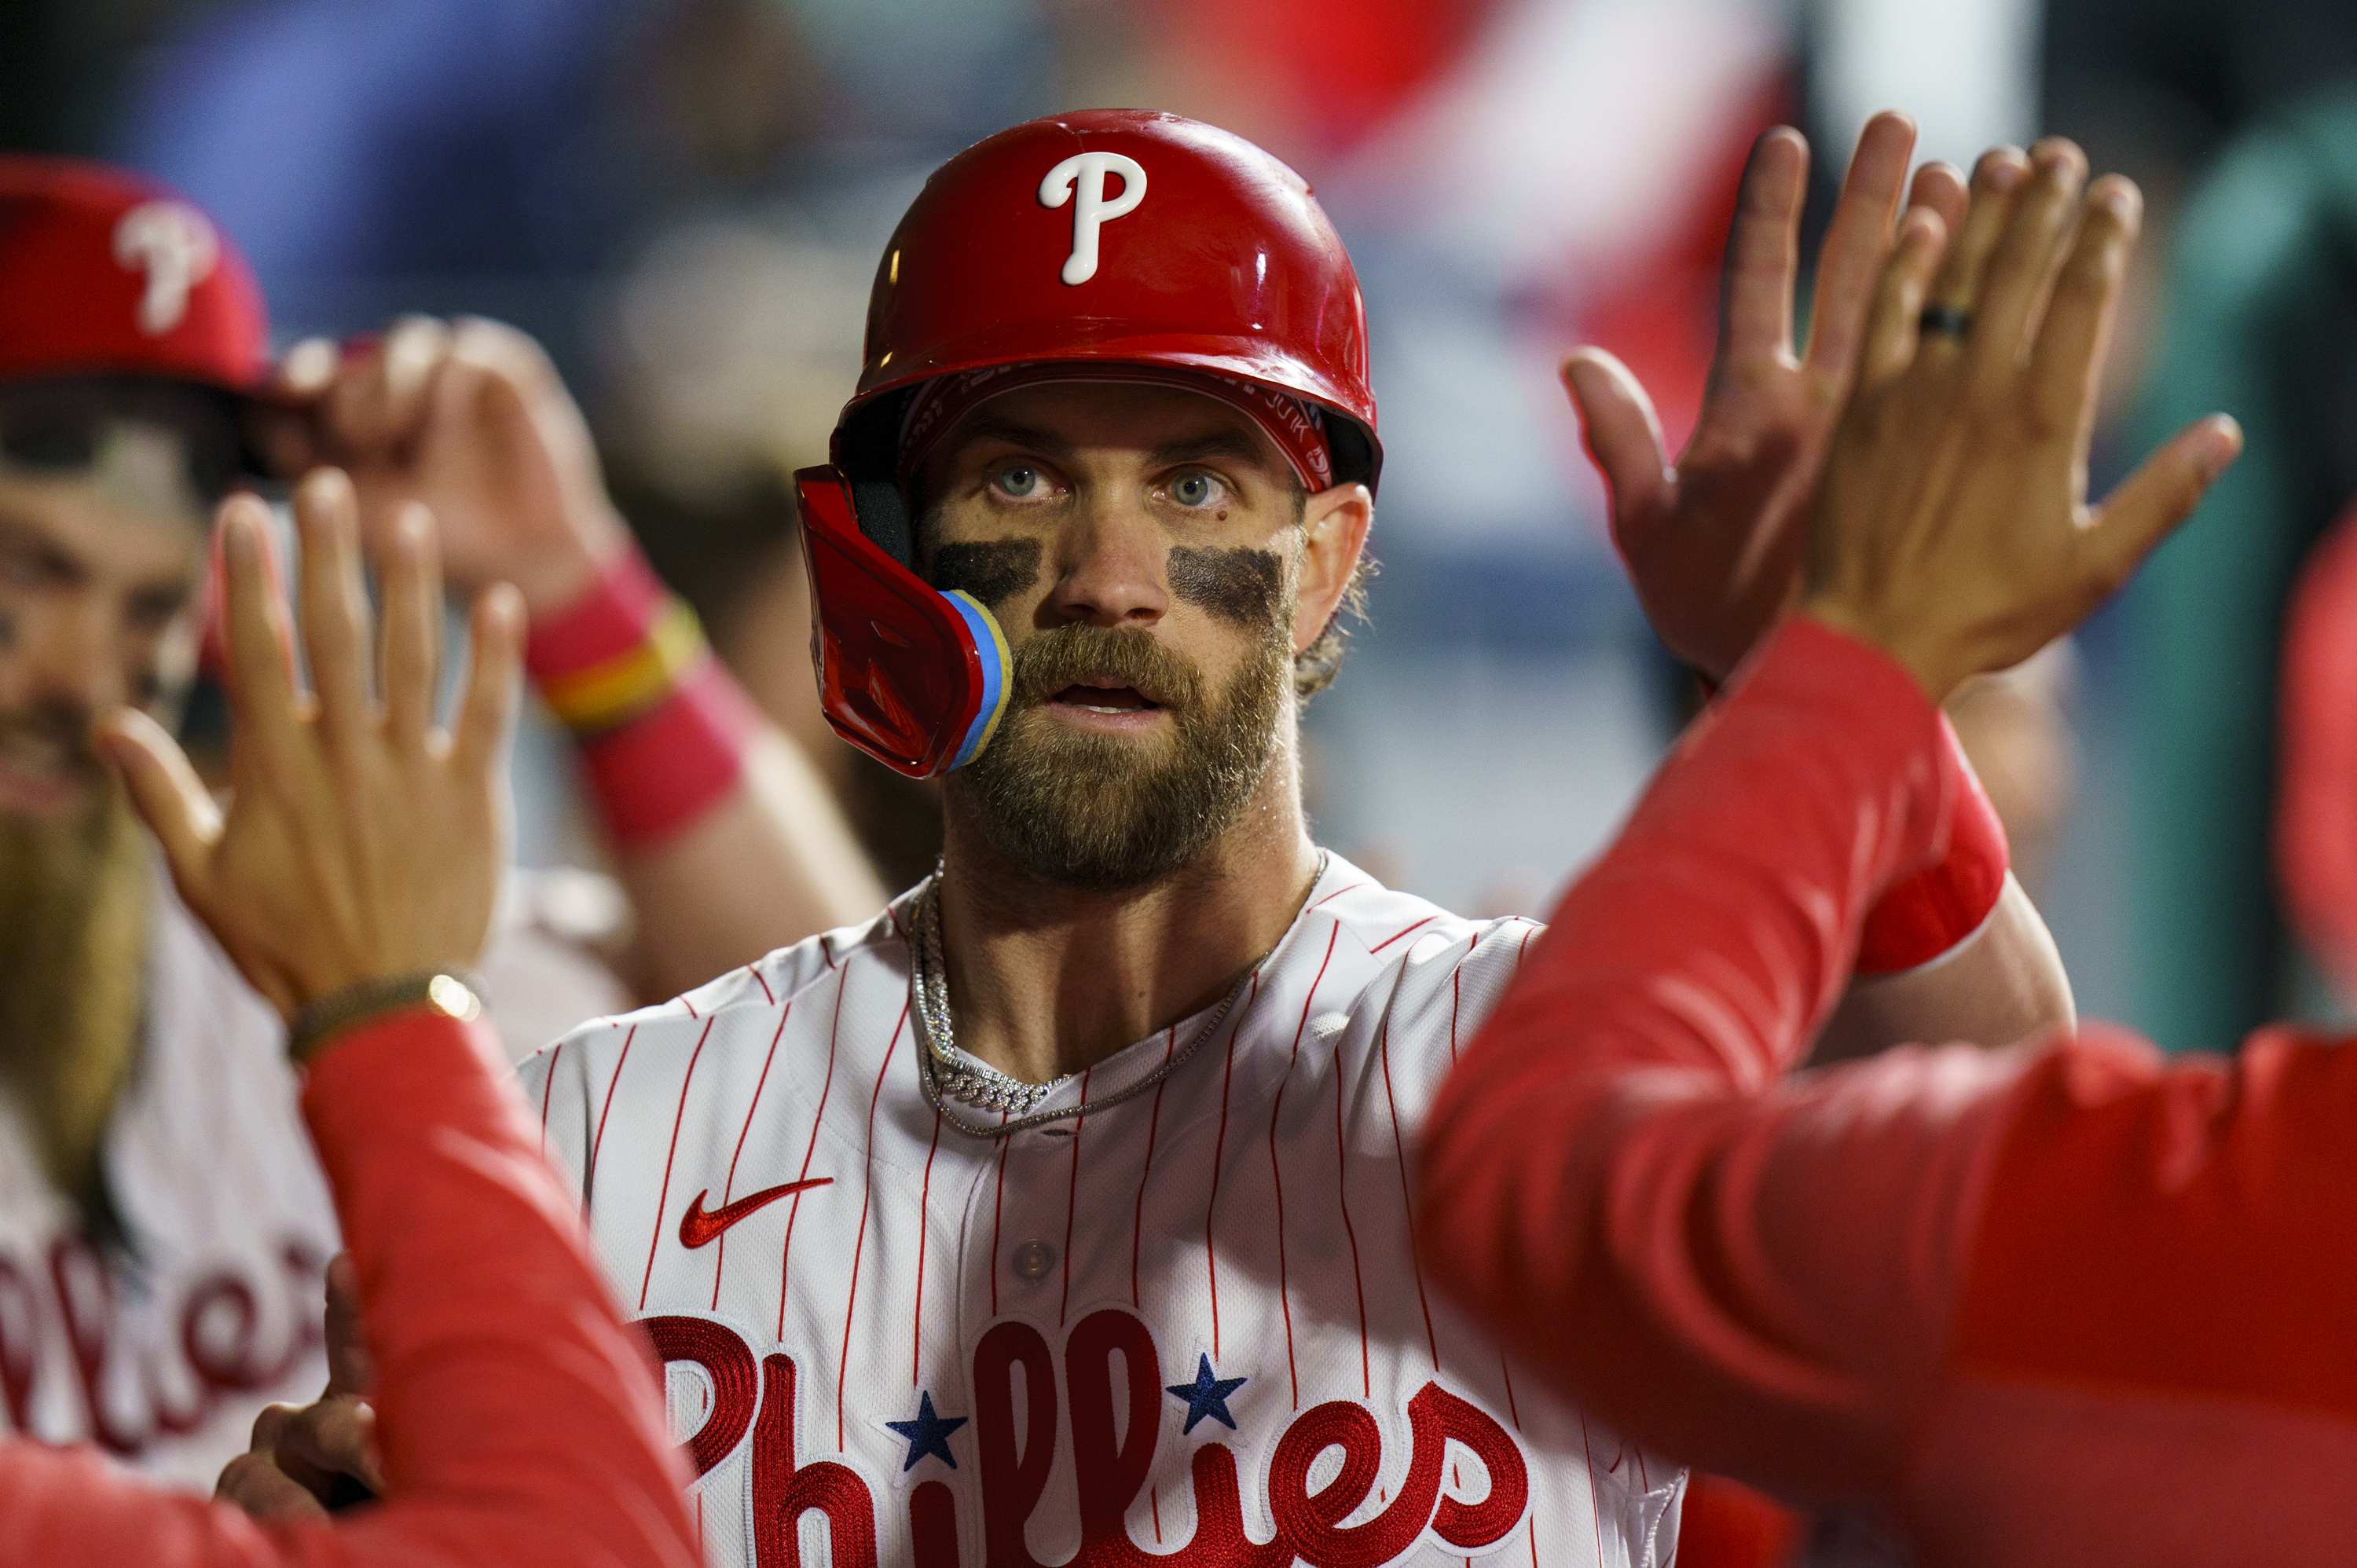 Bryce Harper returns to Phillies after Tommy John surgery - The